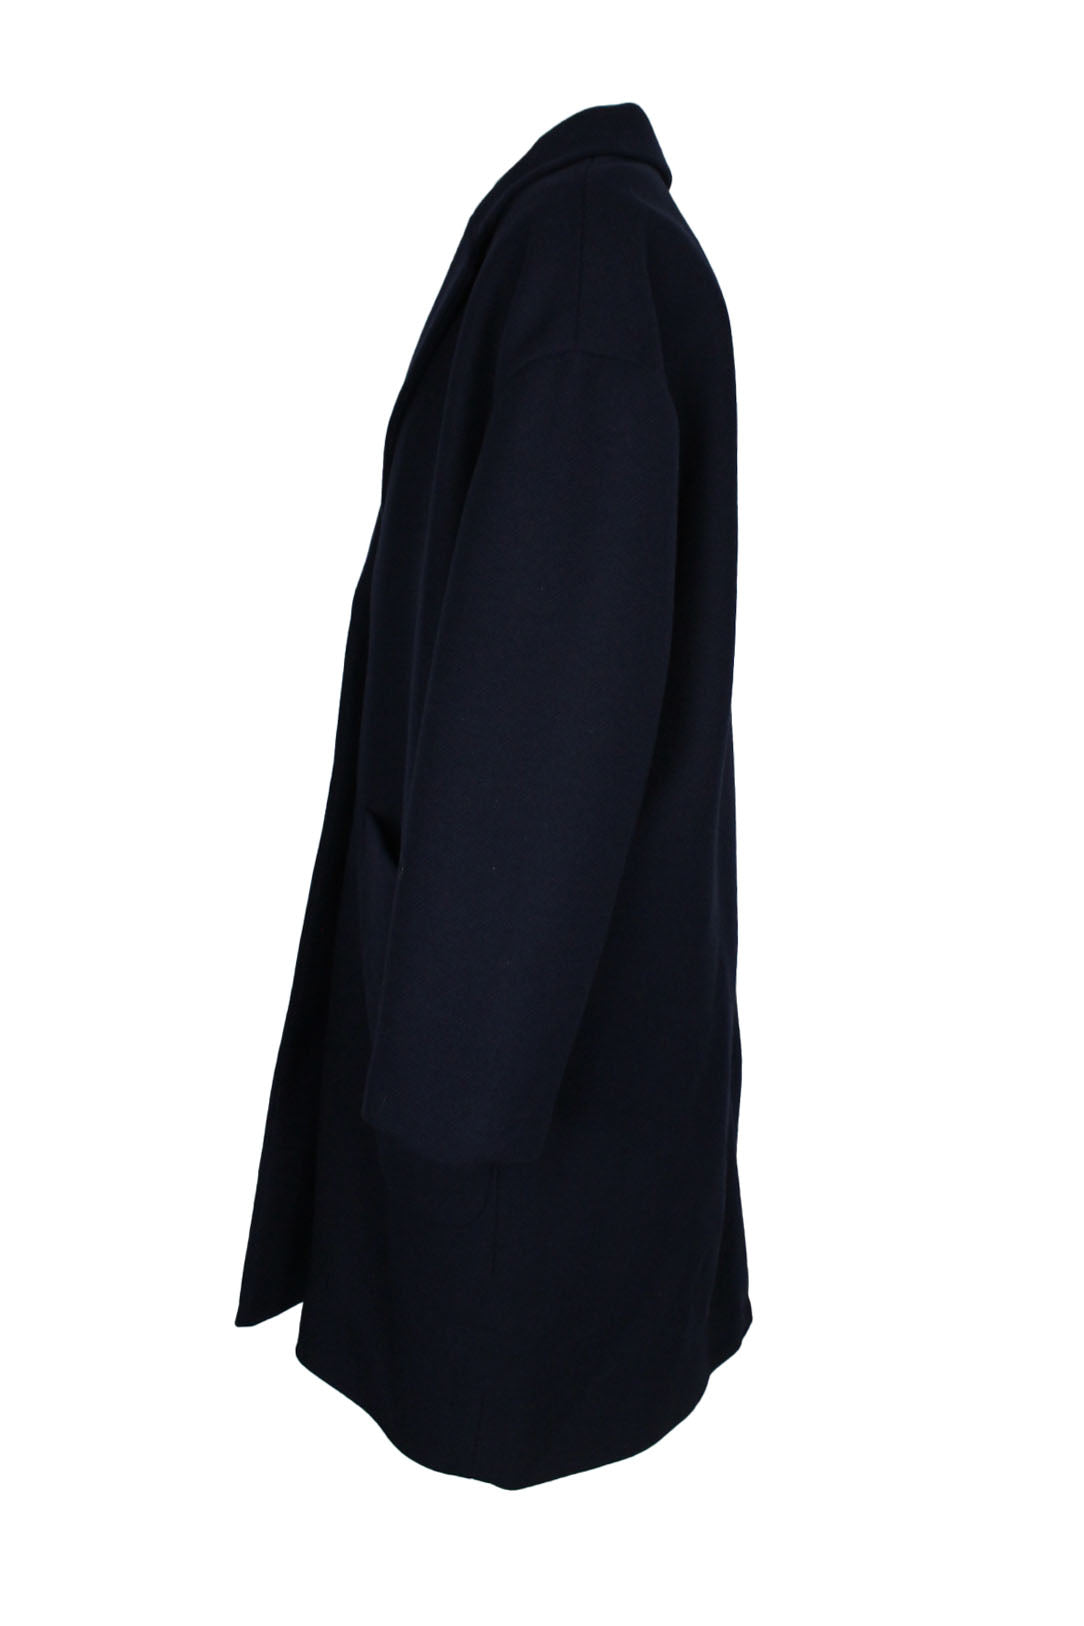 profile of madewell "the dream coat" navy oversized wool coat. original tags attached. 2-button front closure. large square side pockets. 